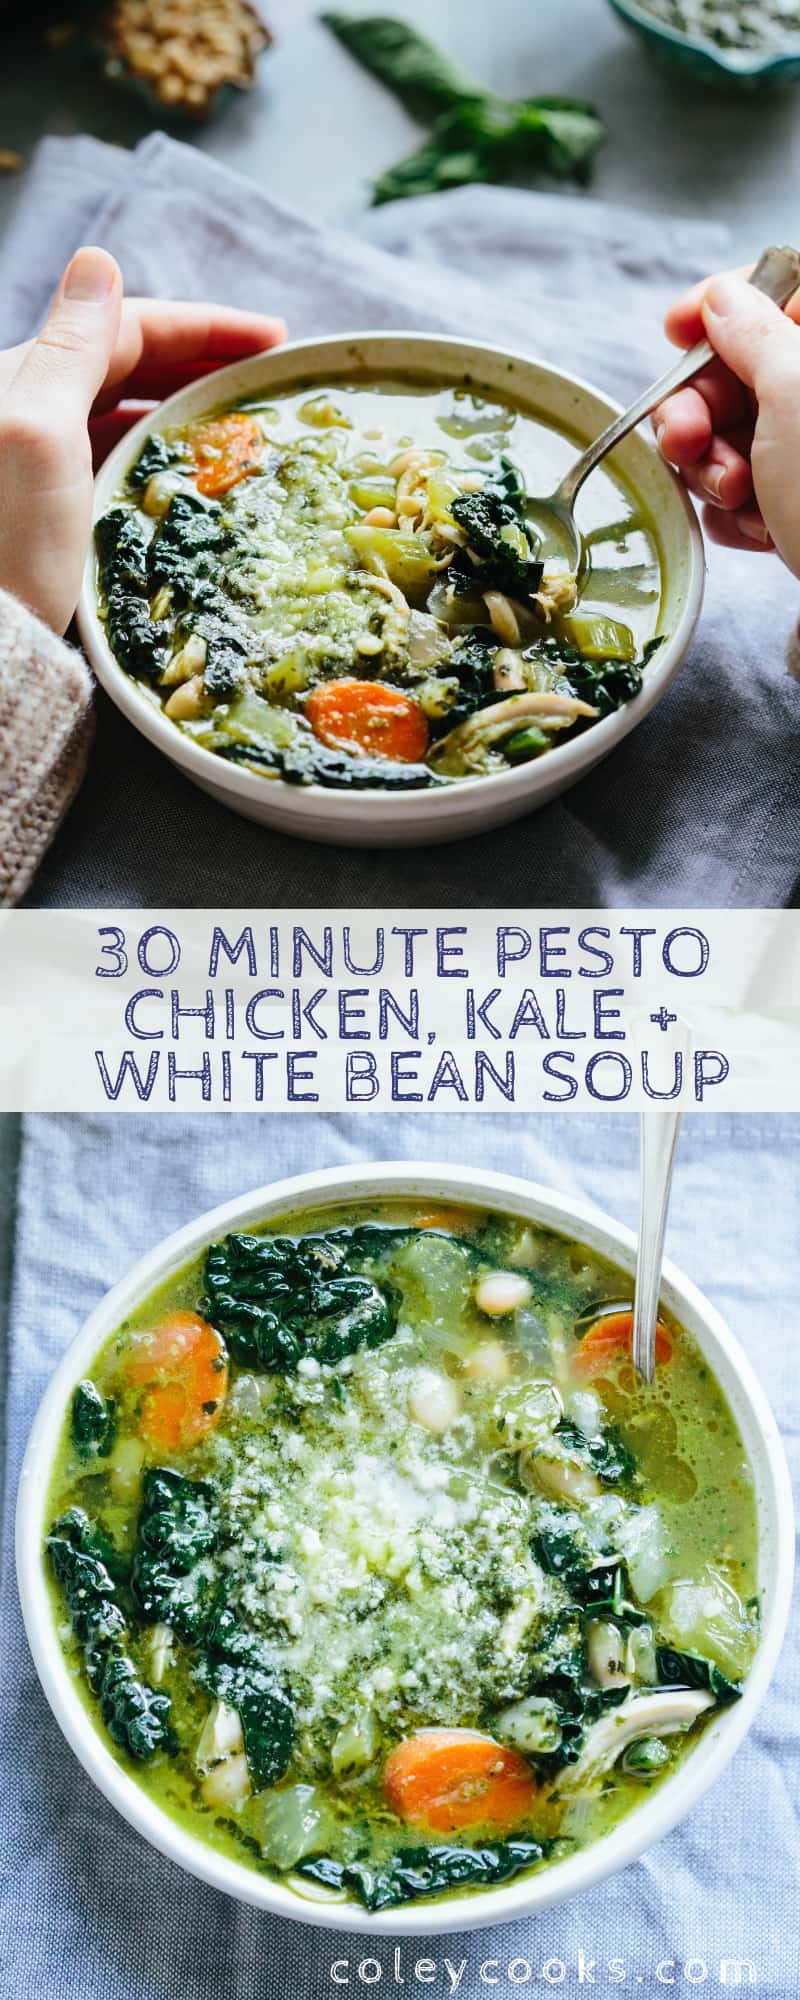 This 30 Minute Pesto Chicken, Kale + White Bean Soup is the perfect cozy recipe to whip up on a cold night when you want something healthy and easy. Gluten free, fresh and delicious! #easy #chicken #soup #recipe #pesto #beans #kale #healthy #glutenfree | ColeyCooks.com